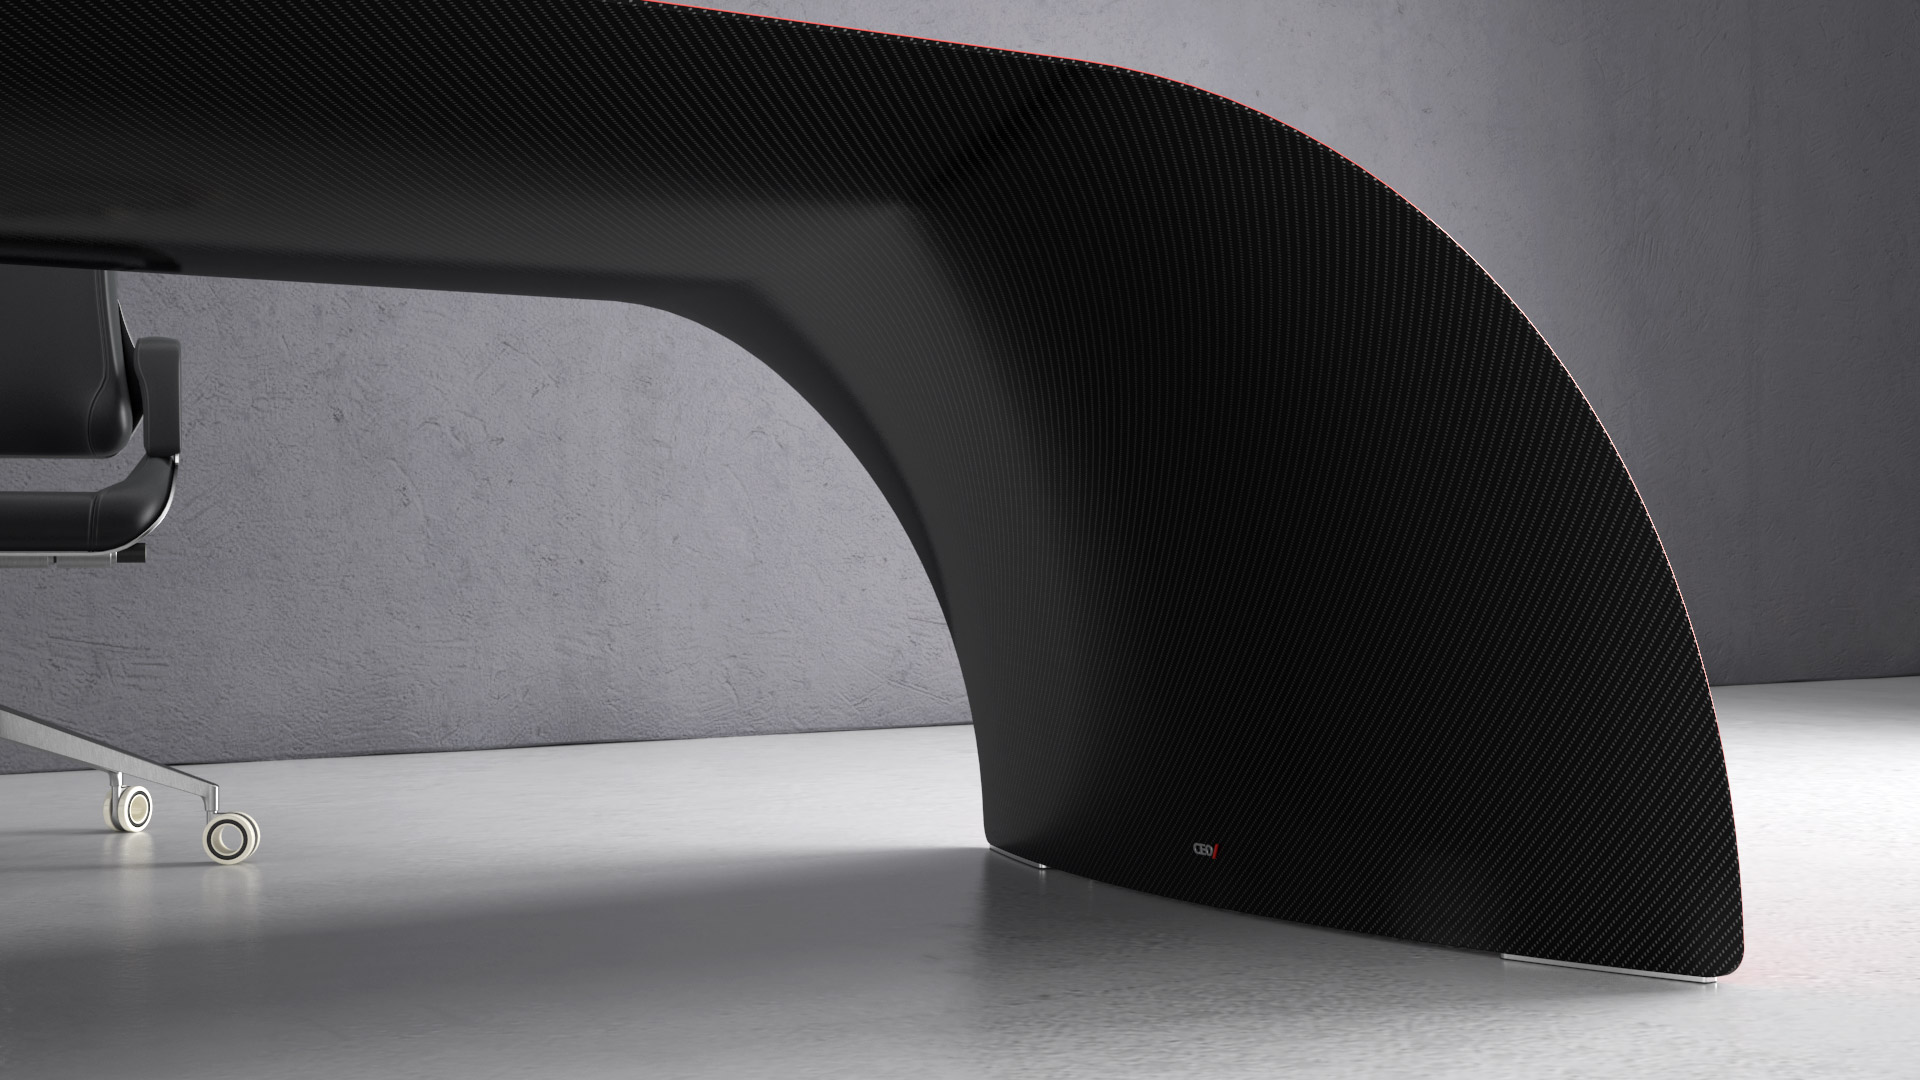 CEO /carbon. Executive desk made of carbon fiber, Kevlar and stainless steel. Painted glossy red on top, transparent glossy on the bottom side.